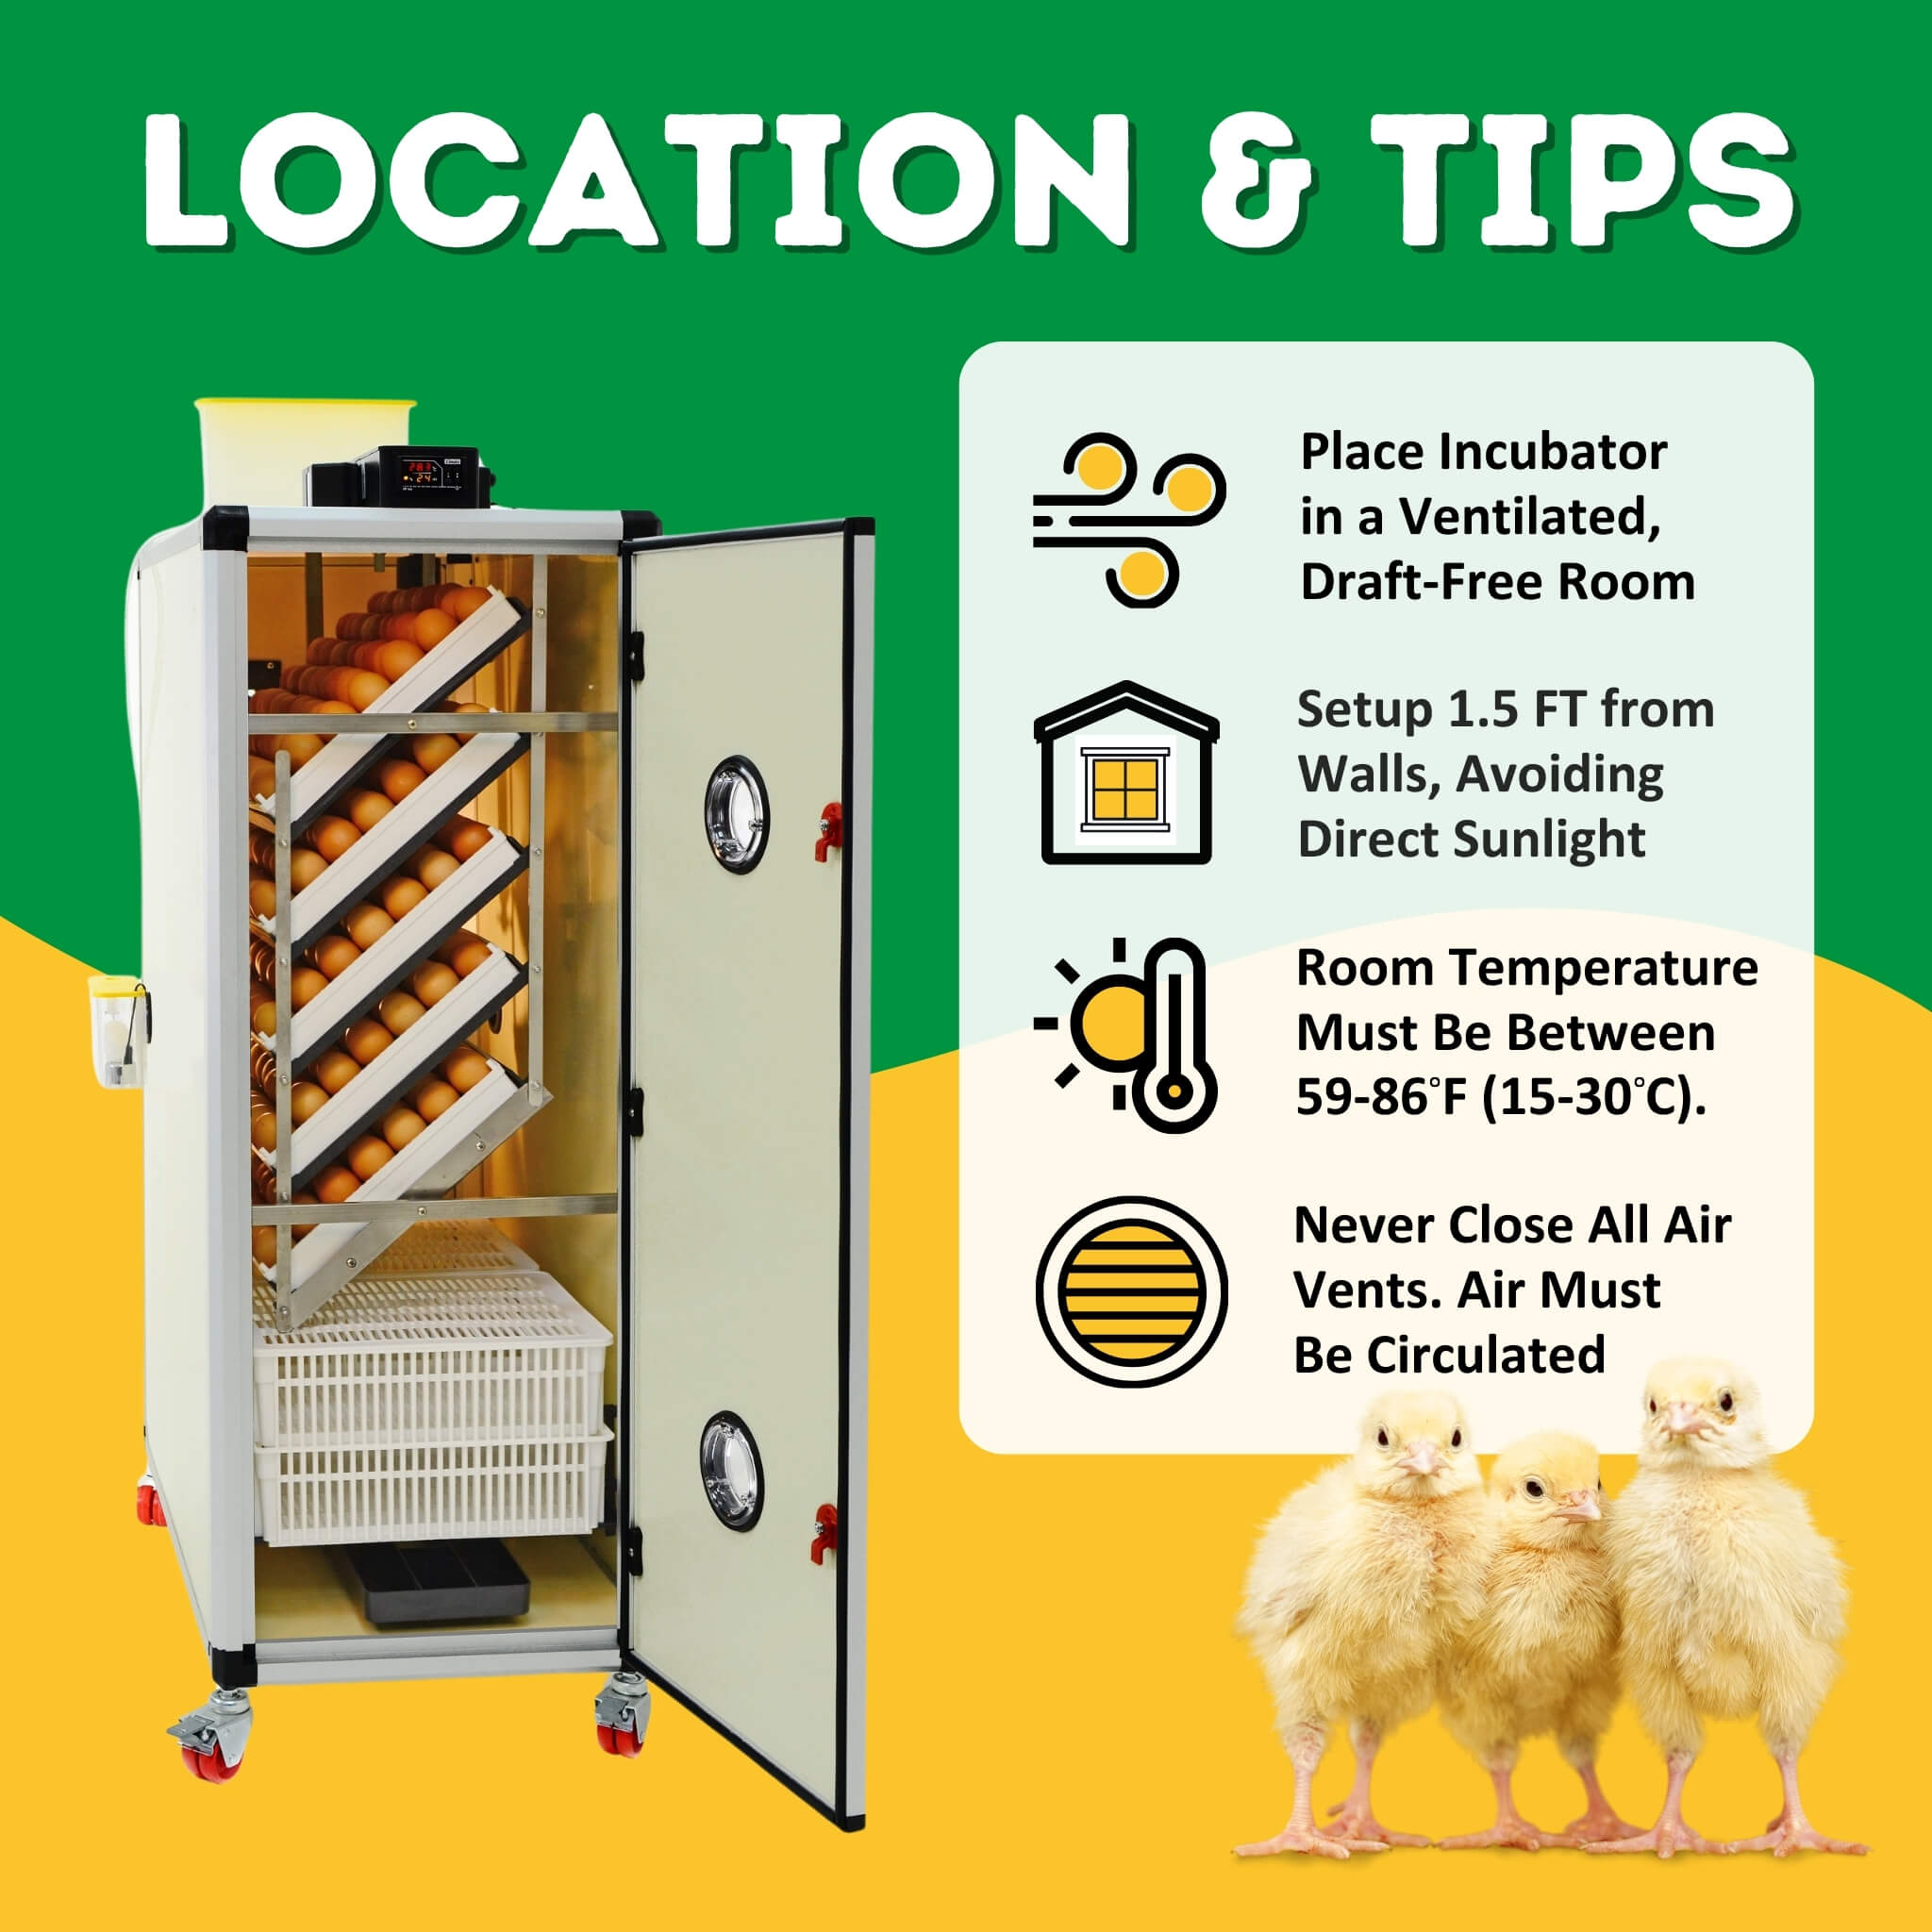 Hatching Time Cimuka. Informative guide on optimal placement of Cimuka HB500S incubator, emphasizing ventilation and space requirements for efficient poultry hatching.